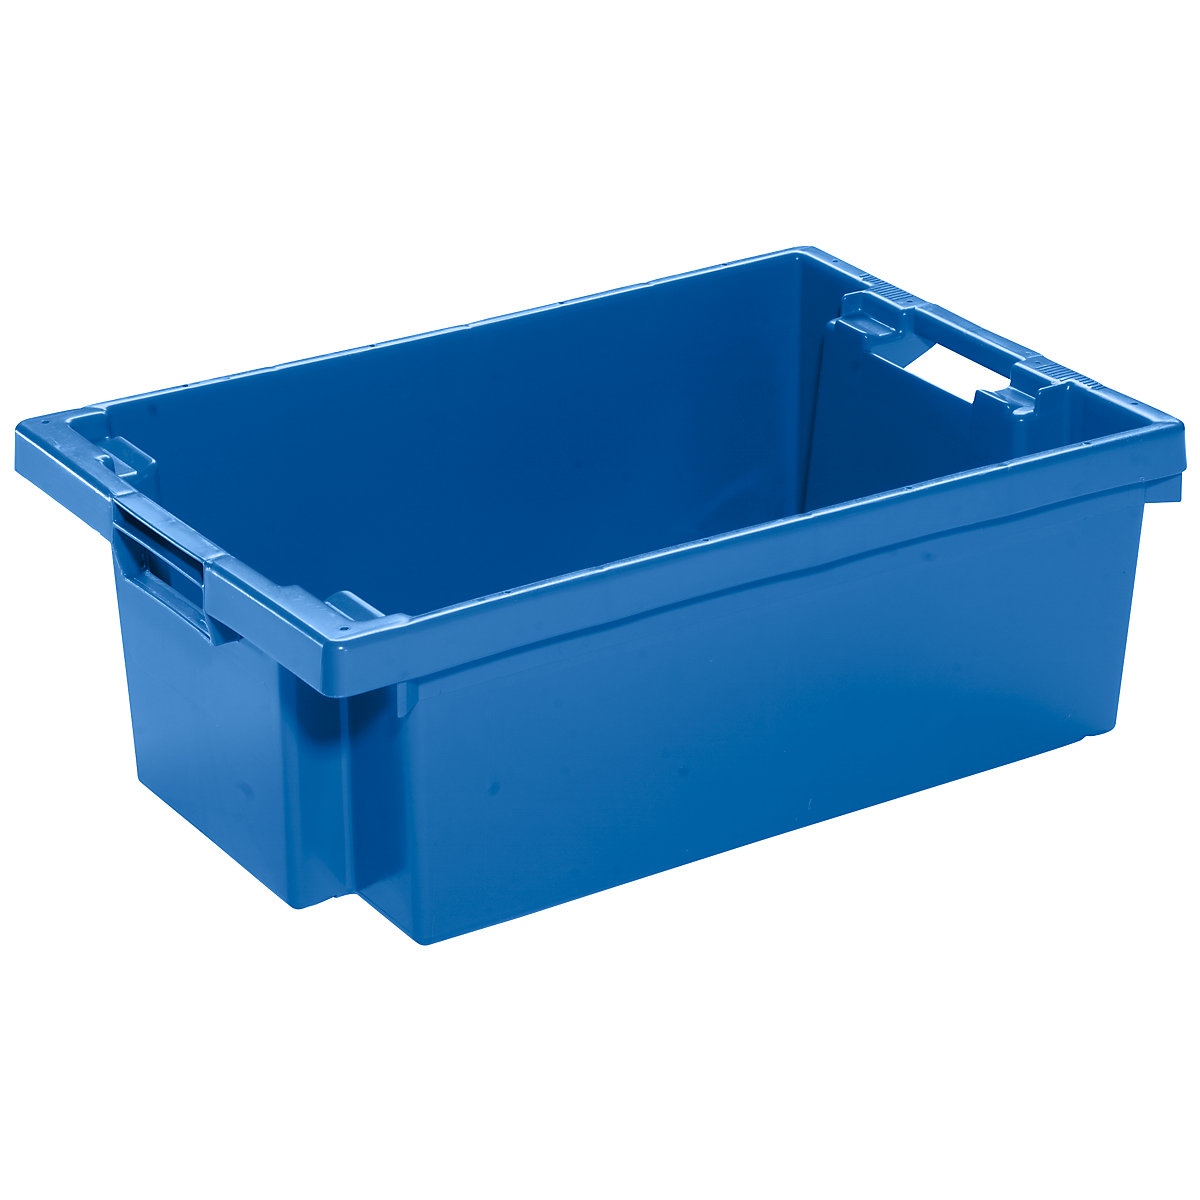 Stack/nest container made of HDPE, capacity 32 l, solid walls and base, blue